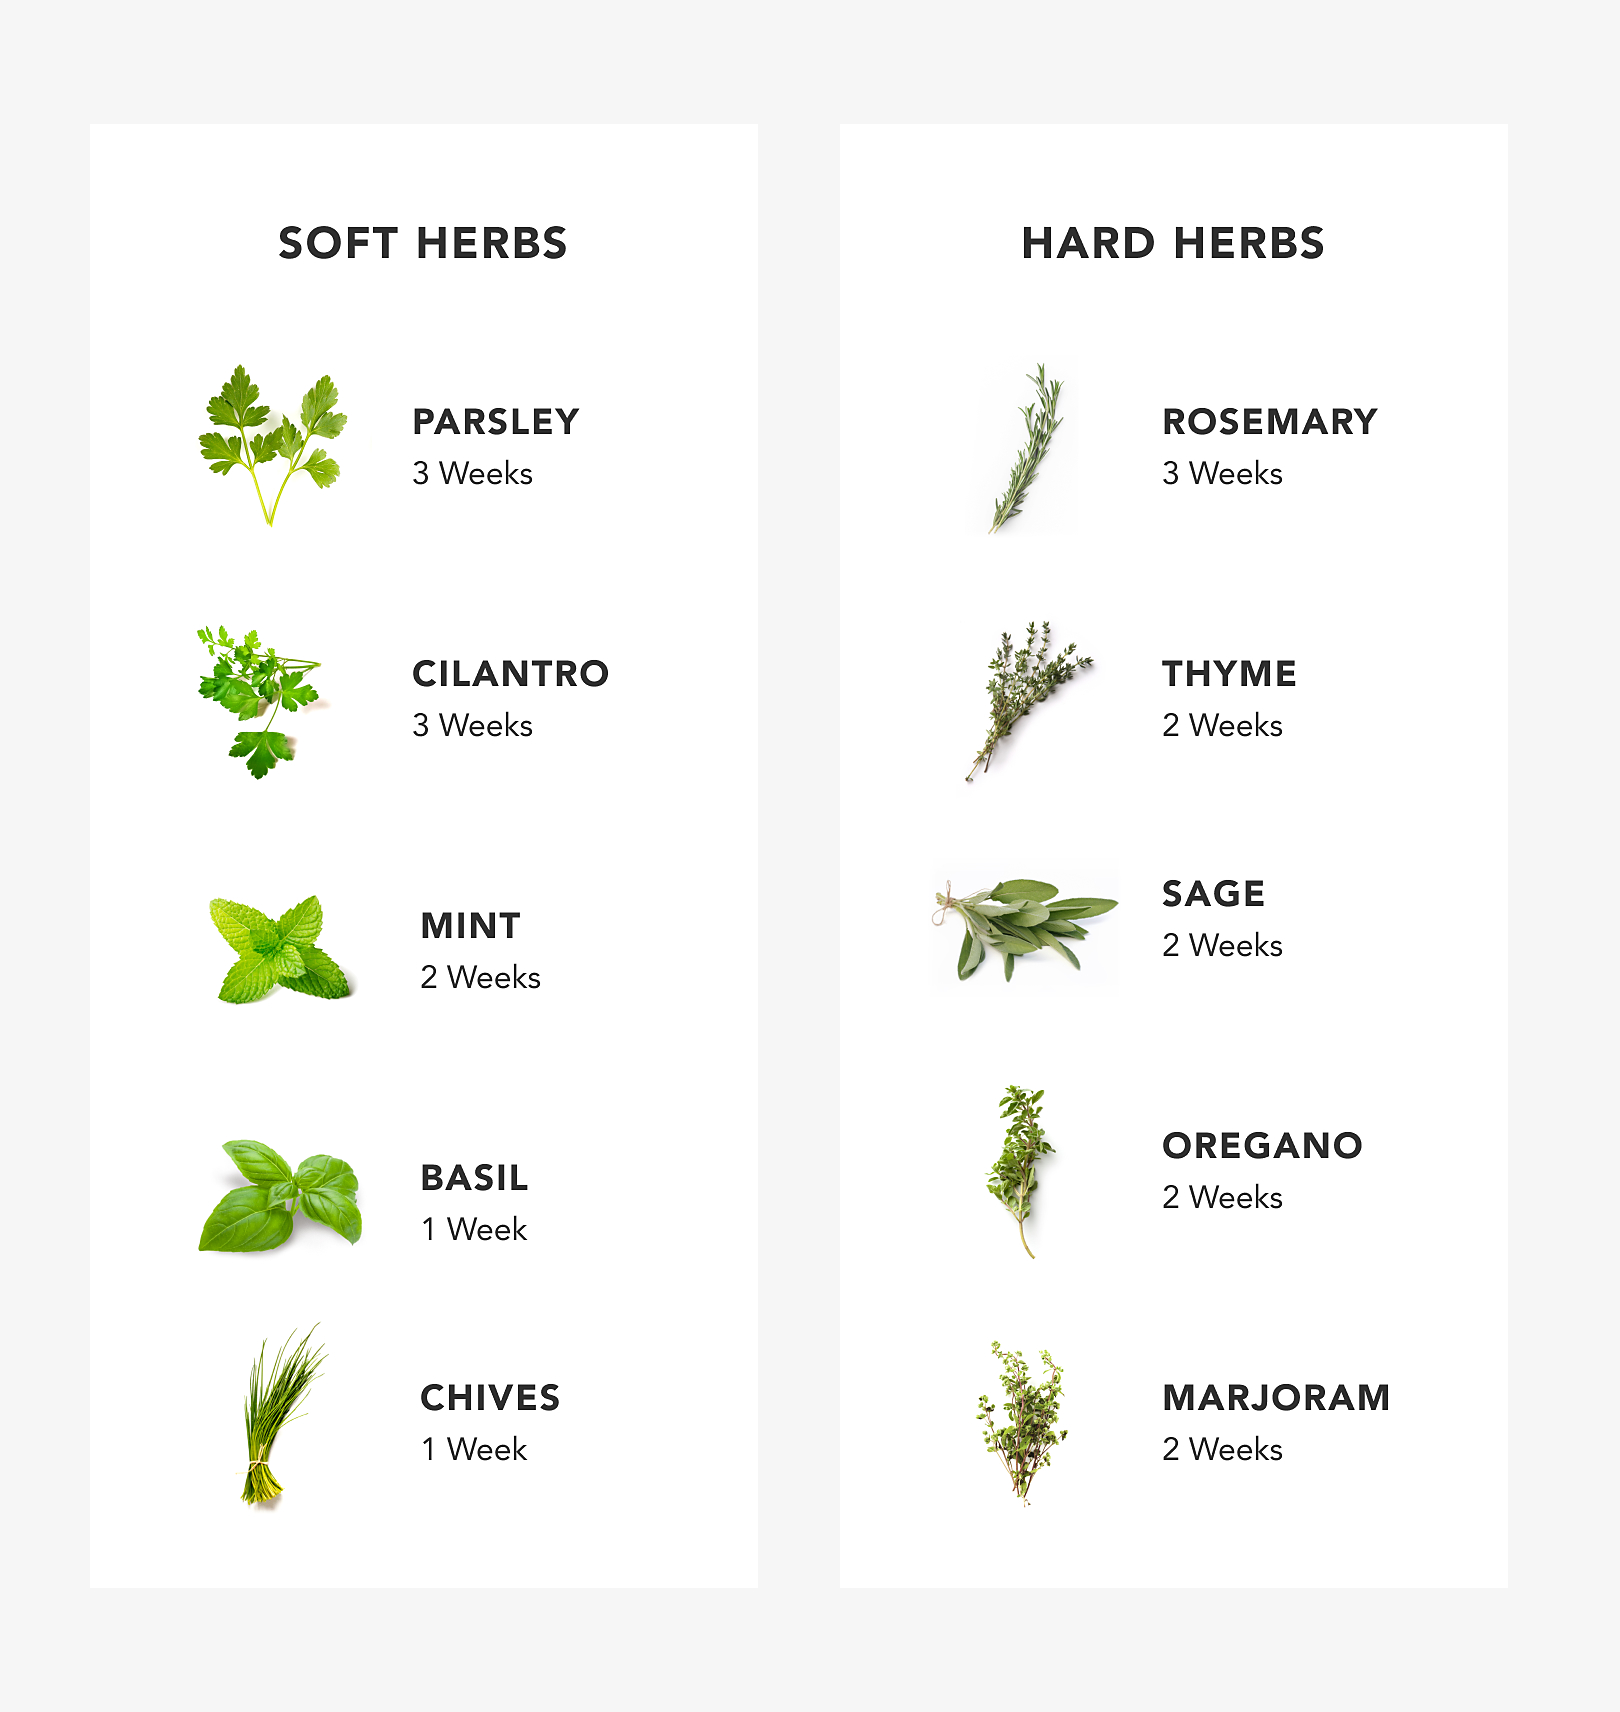 Chart with images of tender and woody herbs.